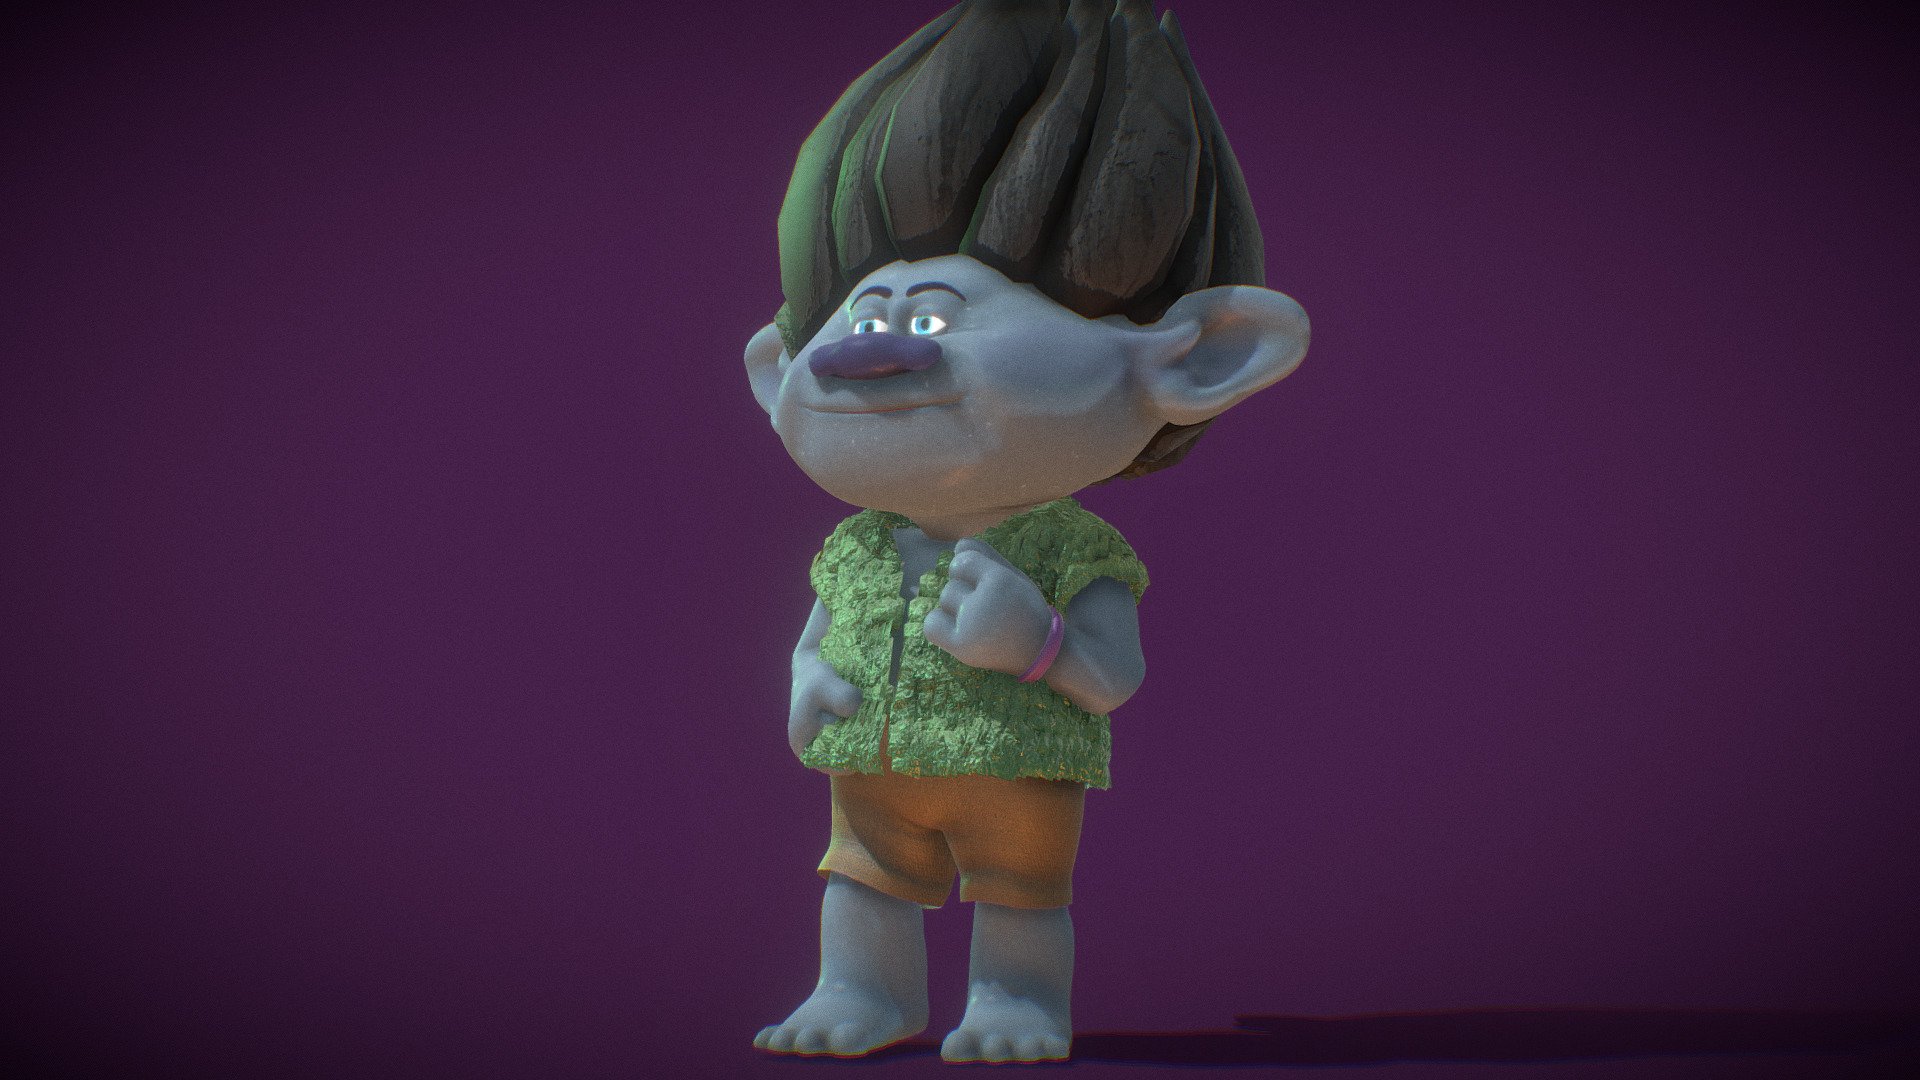 Textured Mapped Rigged

Model rigged and textured ready for animating

This is not a printable model

PBR Model rigged and textured ready for animating

Zip file contains iavatar and fbx format with textures.

Branch is Poppy's boyfriend, and the male protagonist of the DreamWorks Trolls franchise. 

If you have any questions please don’t hesitate to contact me. I will respond you ASAP. I encourage you to check my other 3D models 3d model